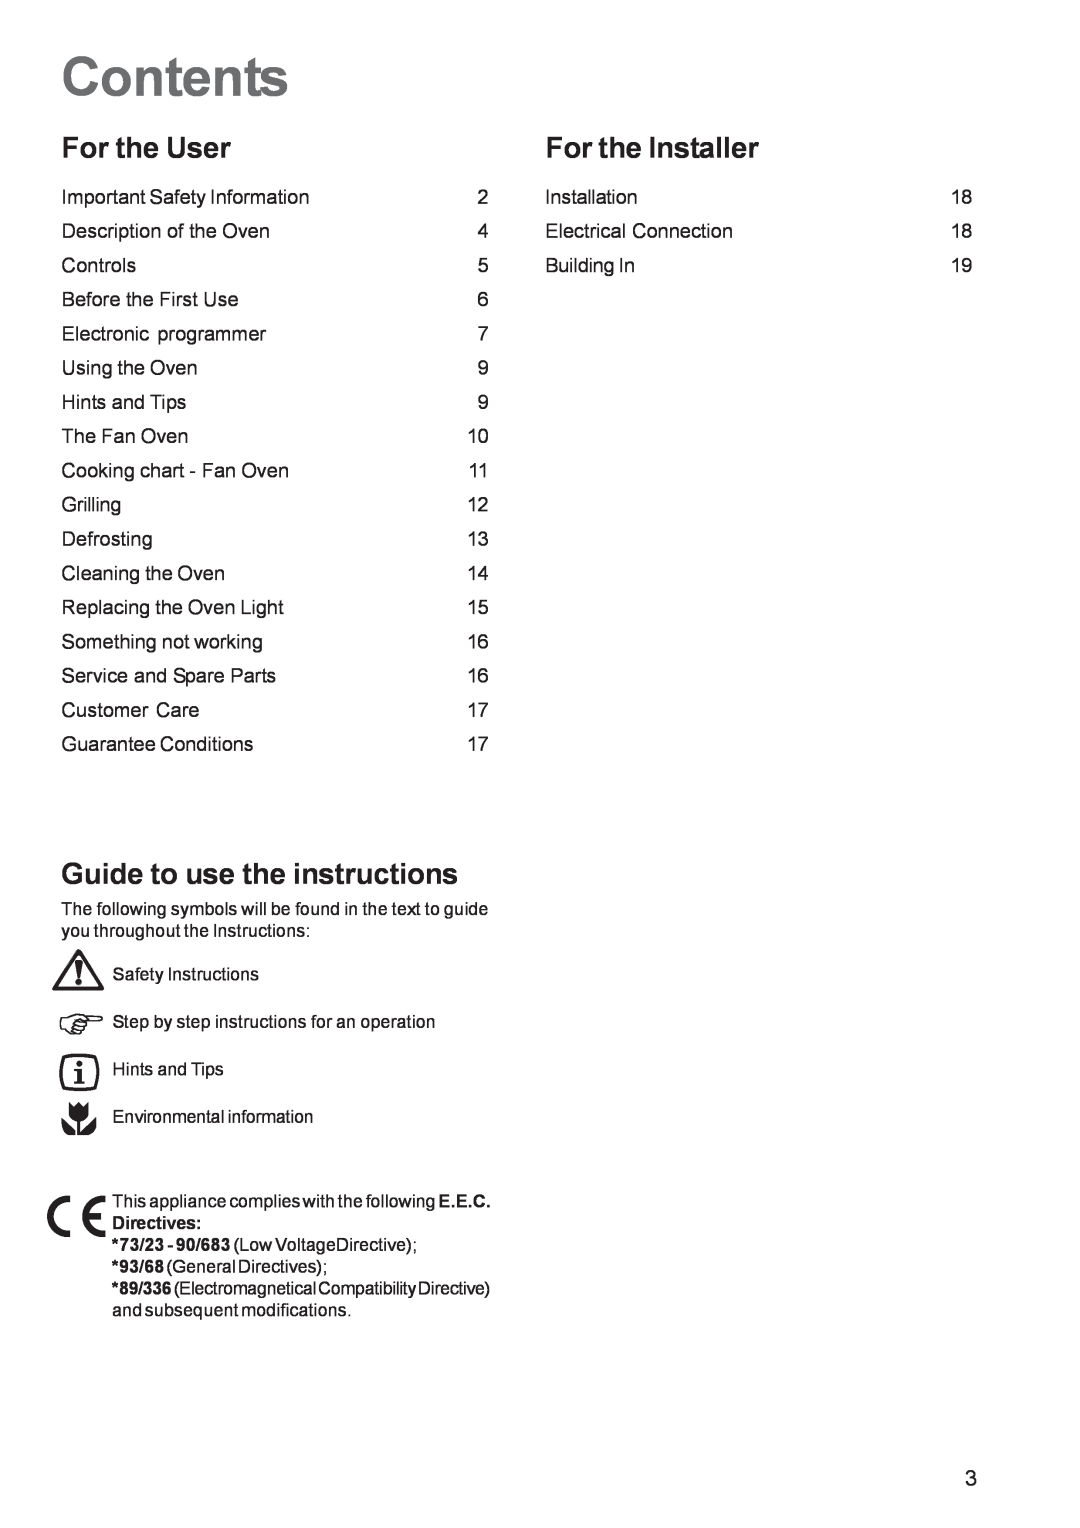 Zanussi ZBF 361 manual Contents, For the User, For the Installer, Guide to use the instructions 